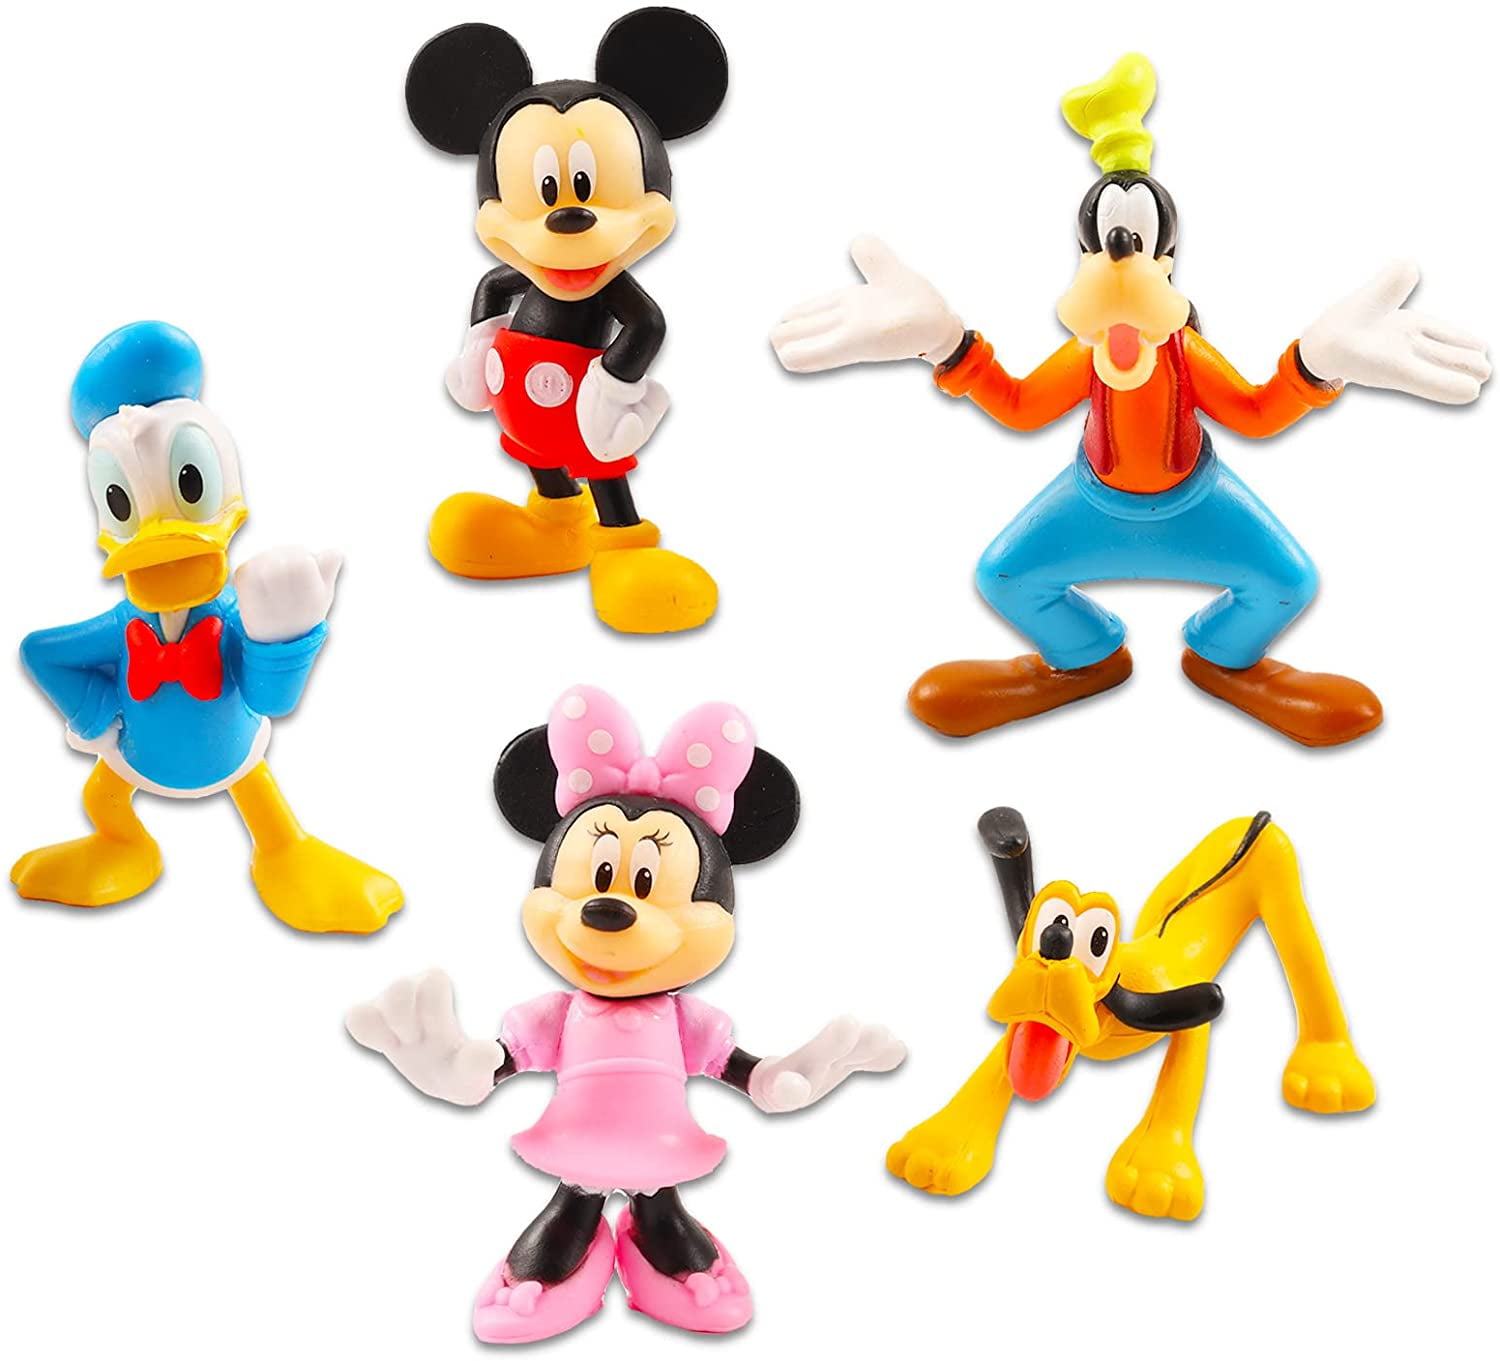 NEW IN BAG Disney Junior Mickey Mouse Clubhouse Pluto Goofy Figures Toys U Pick 